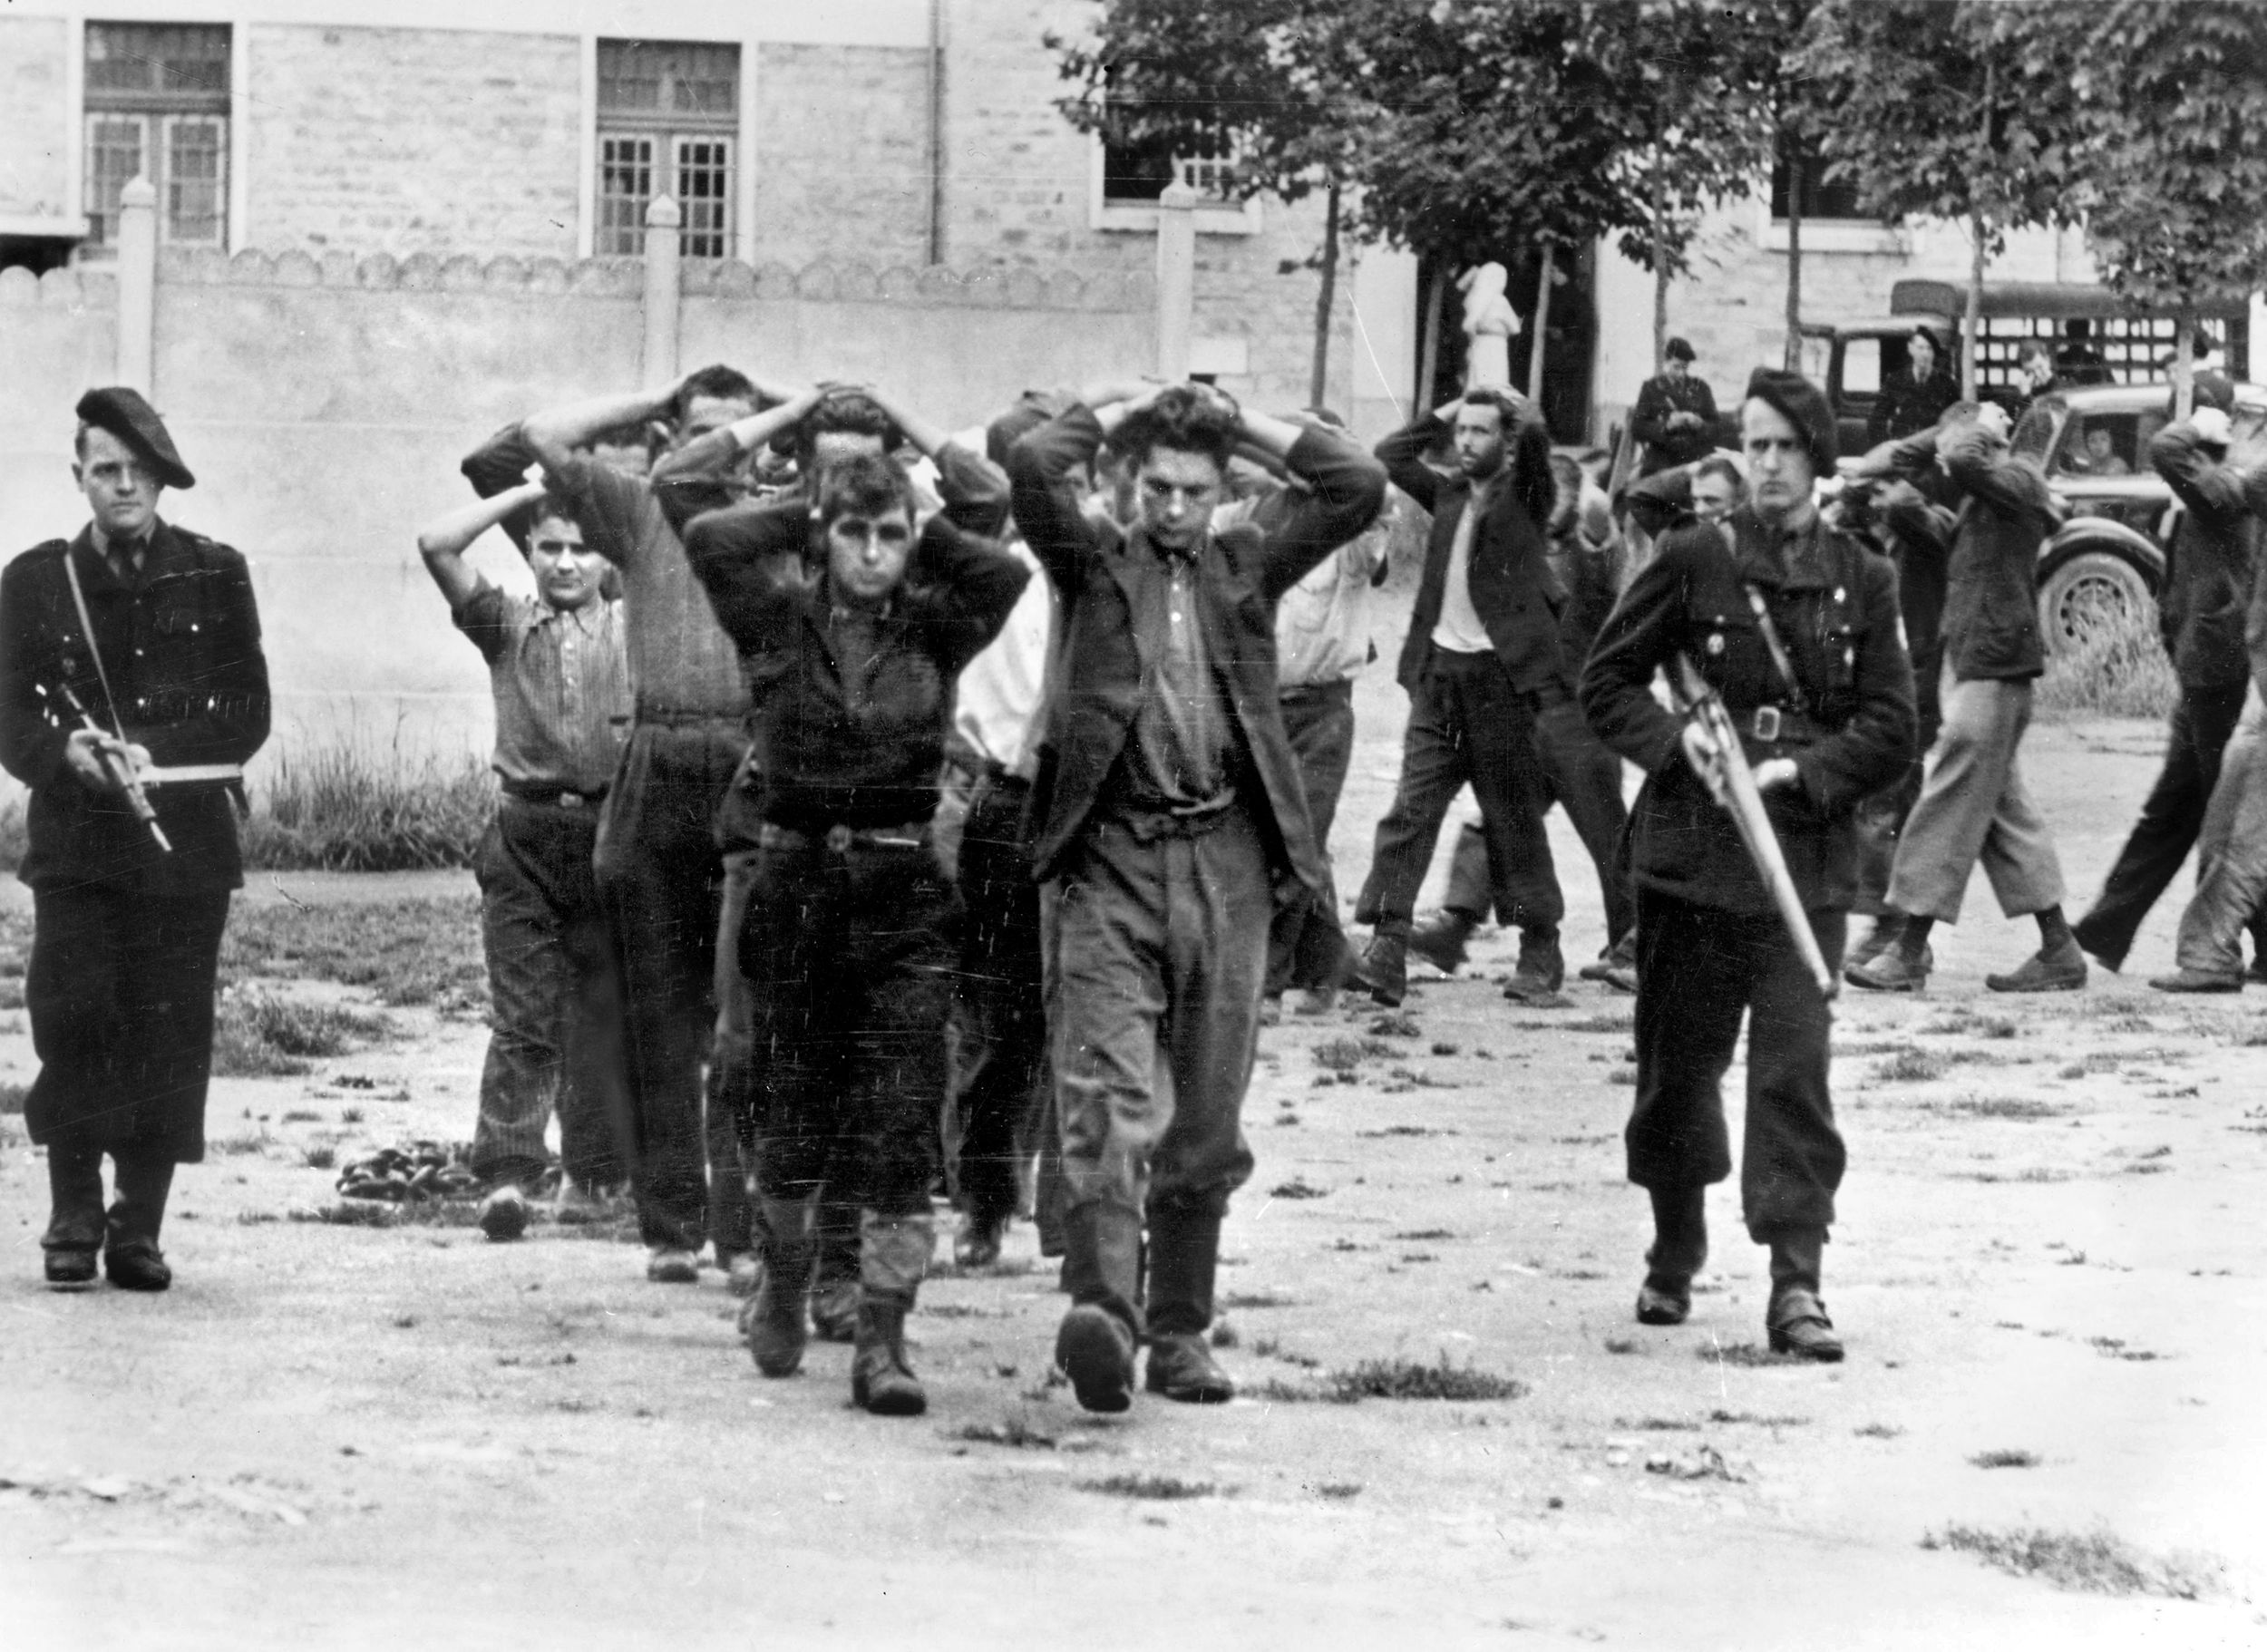 The Milice, a secret police force set up by the puppet Vichy government when France signed the armistice with Germany in 1940, arrest suspected Résistants. Four Milice were suspected to have helped Das Reich plan the Oradour massacre. After the Libération, many Milice were summarily executed as traitors by the French Résistance.